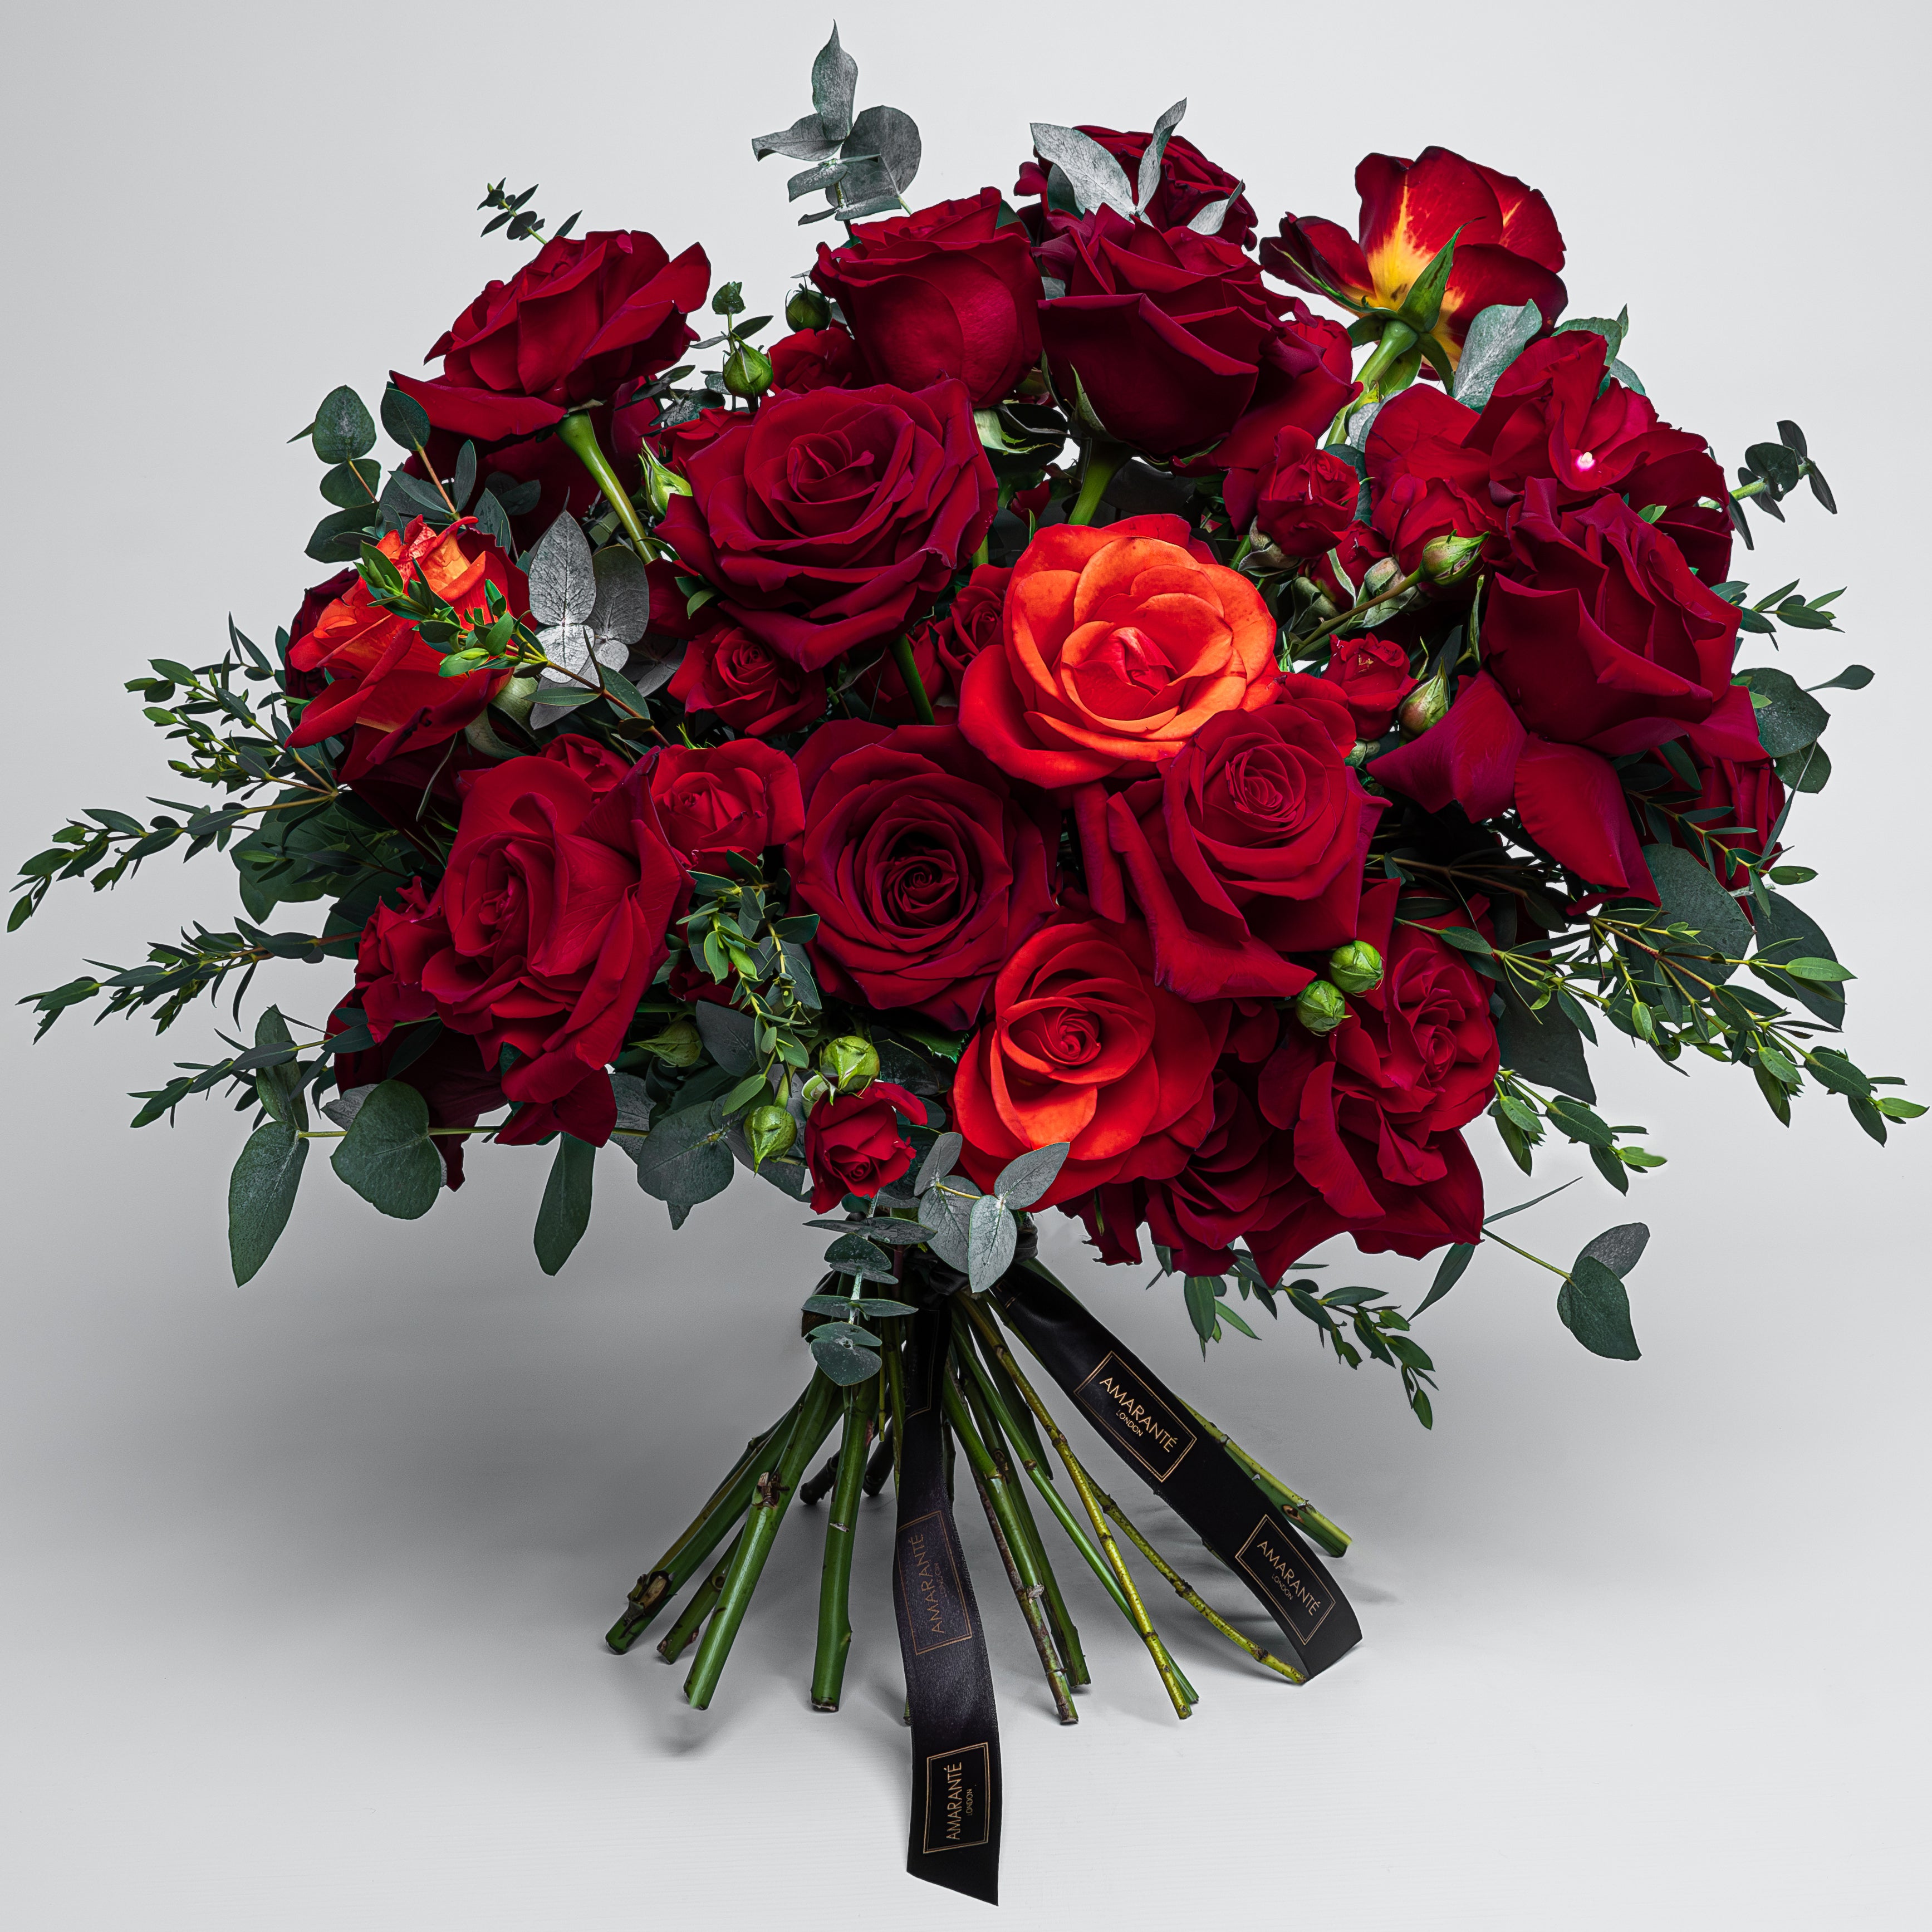 A captivating fresh flower Valentine&#39;s Day bouquet showcasing exquisite arrangements of elegant red roses in vibrant shades, perfectly symbolising love and affection. This sophisticated and refined bouquet exudes a timeless sense of elegance and grace, perfectly designed for a stylish and classy Vday gesture. This polished and luxurious bouquet of roses, available with free UK delivery, is the ideal sophisticated representation of your chic and trendy affection.